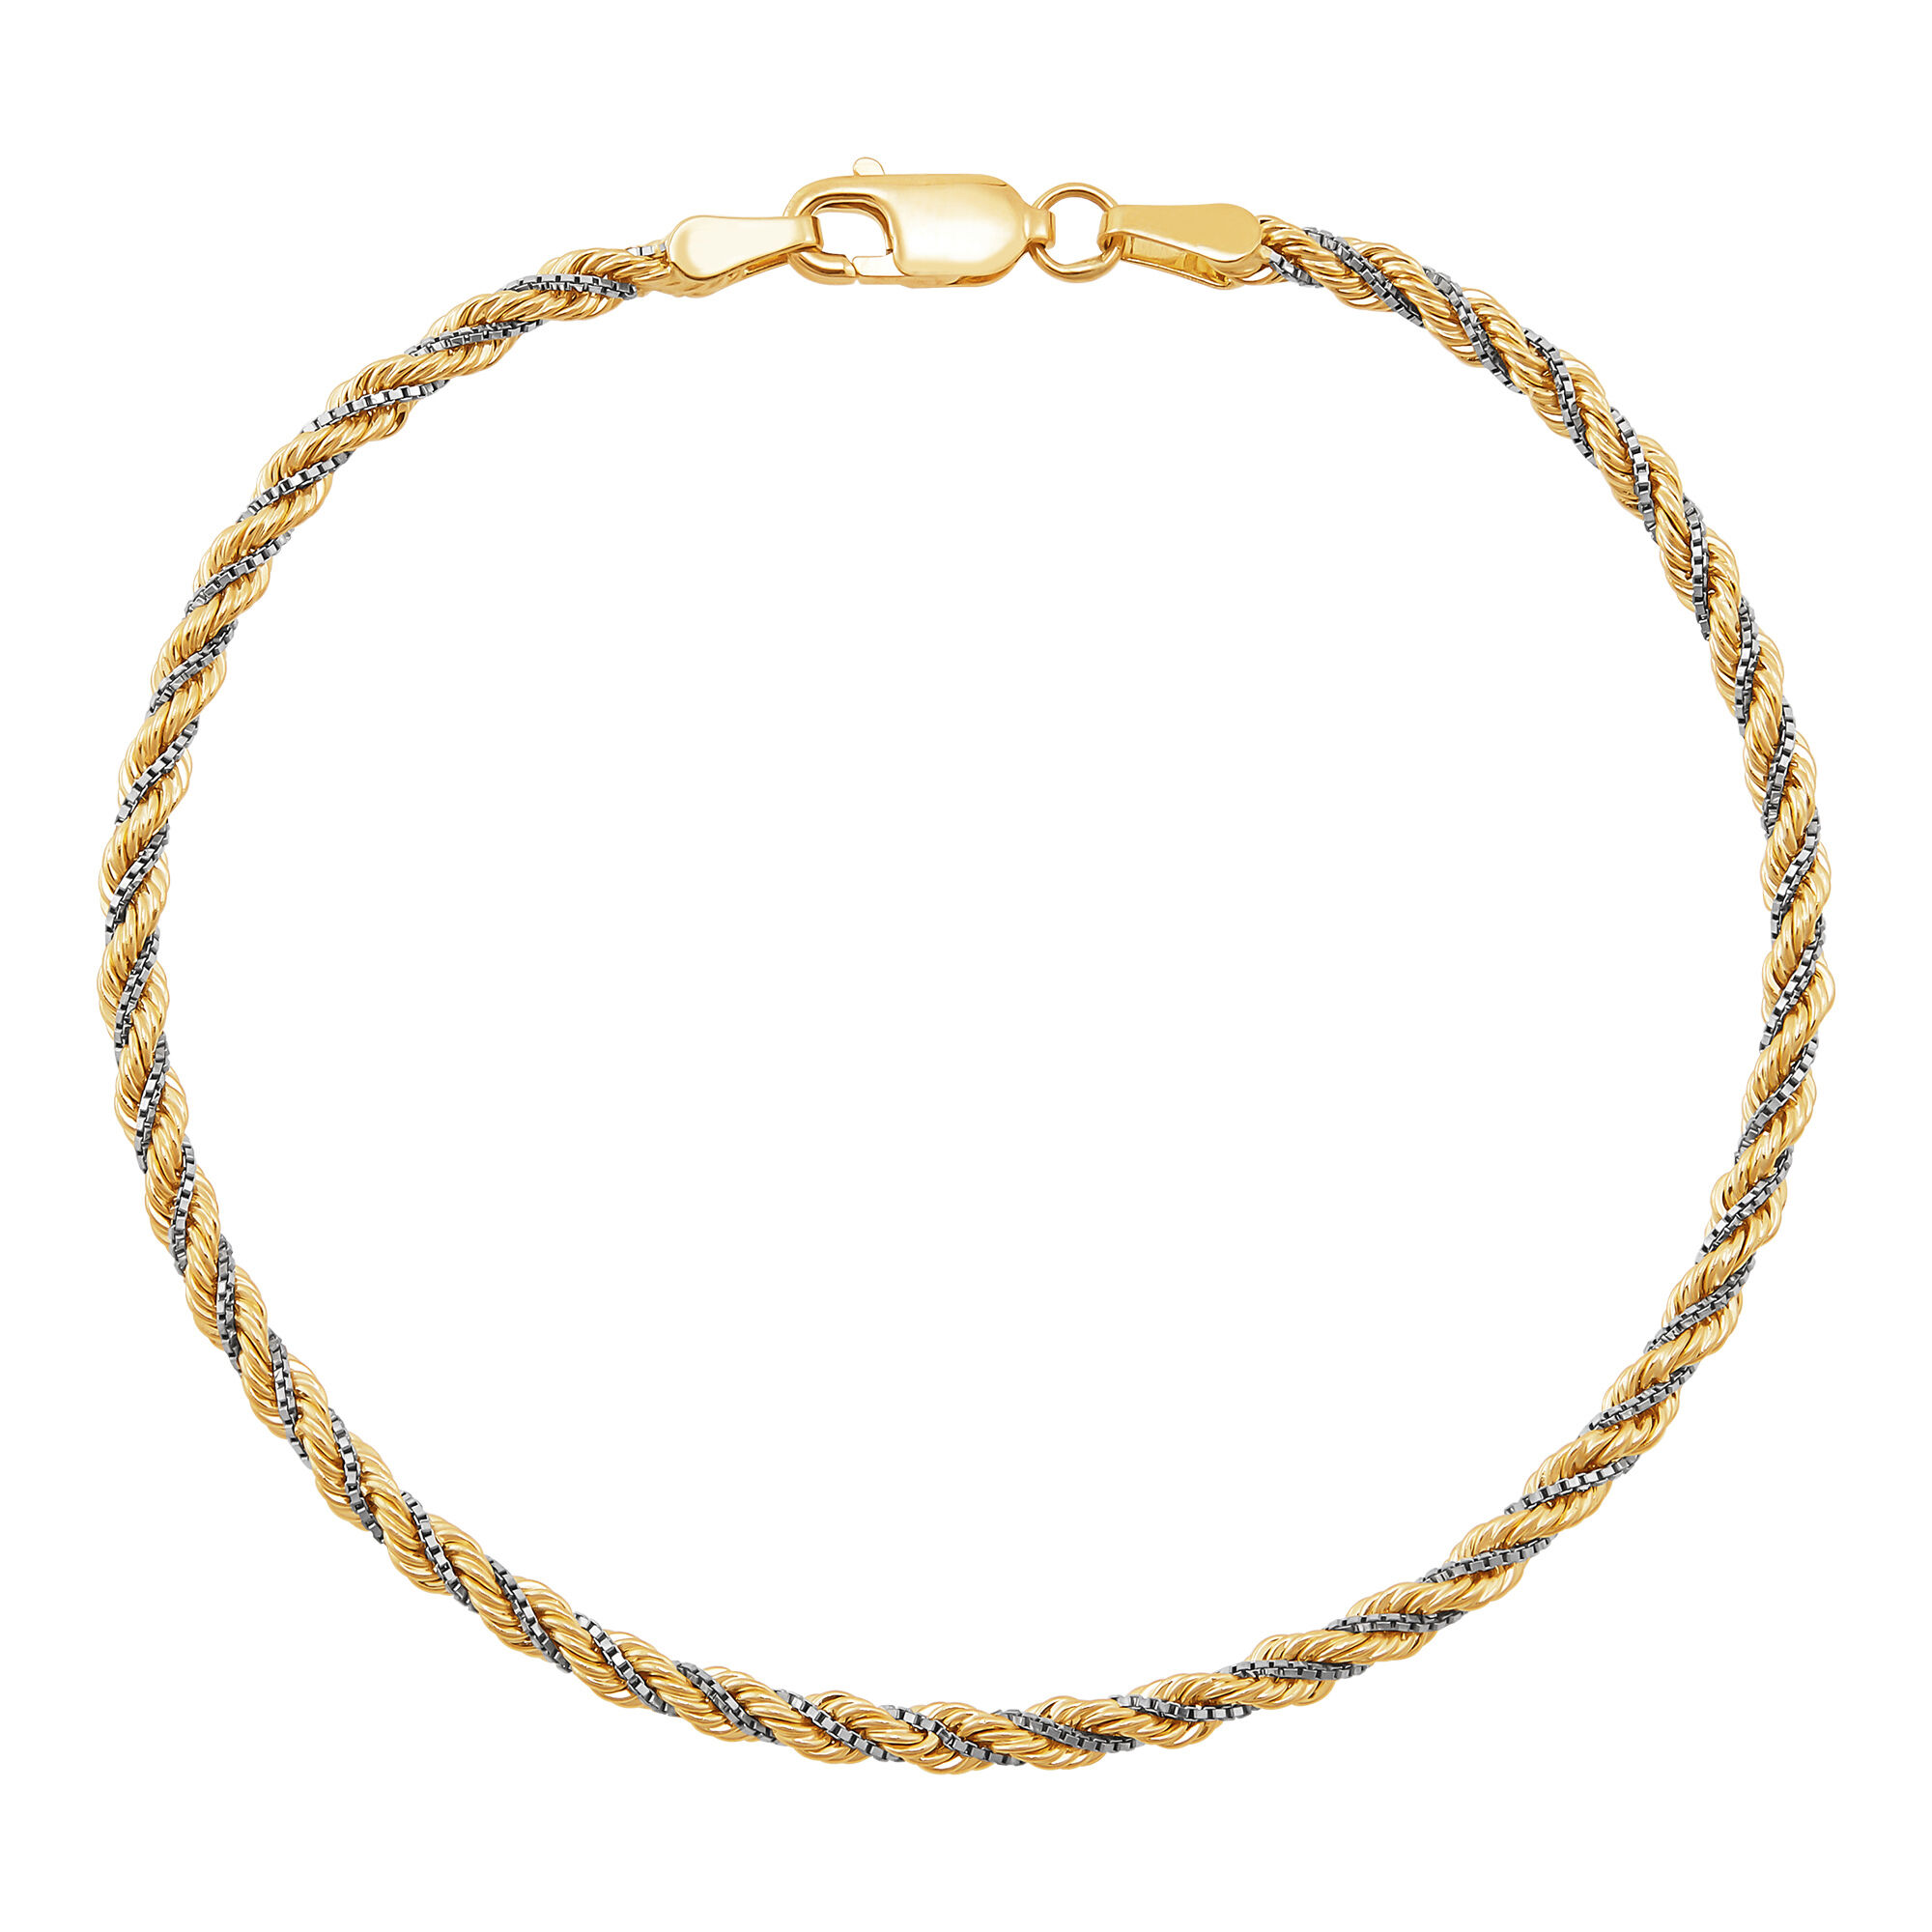 Gold Colored Jewelry|stainless Steel Gold Plated Twisted Rope Chain Bracelet  For Women